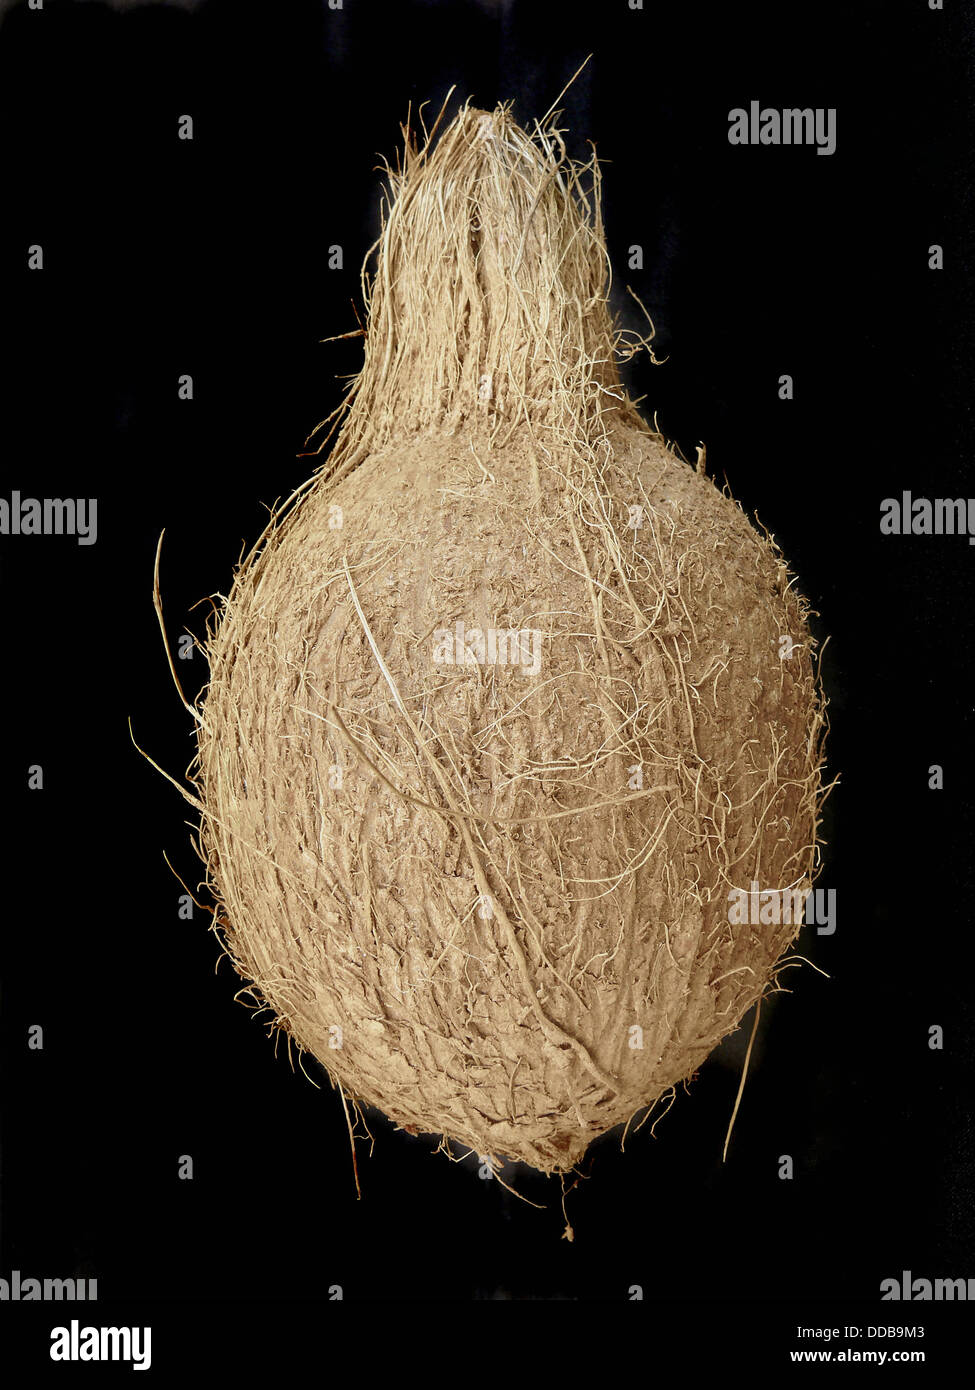 Coconut  Cocos nucifera, used in cooking and for oil  Pune, Maharashtra, India Stock Photo